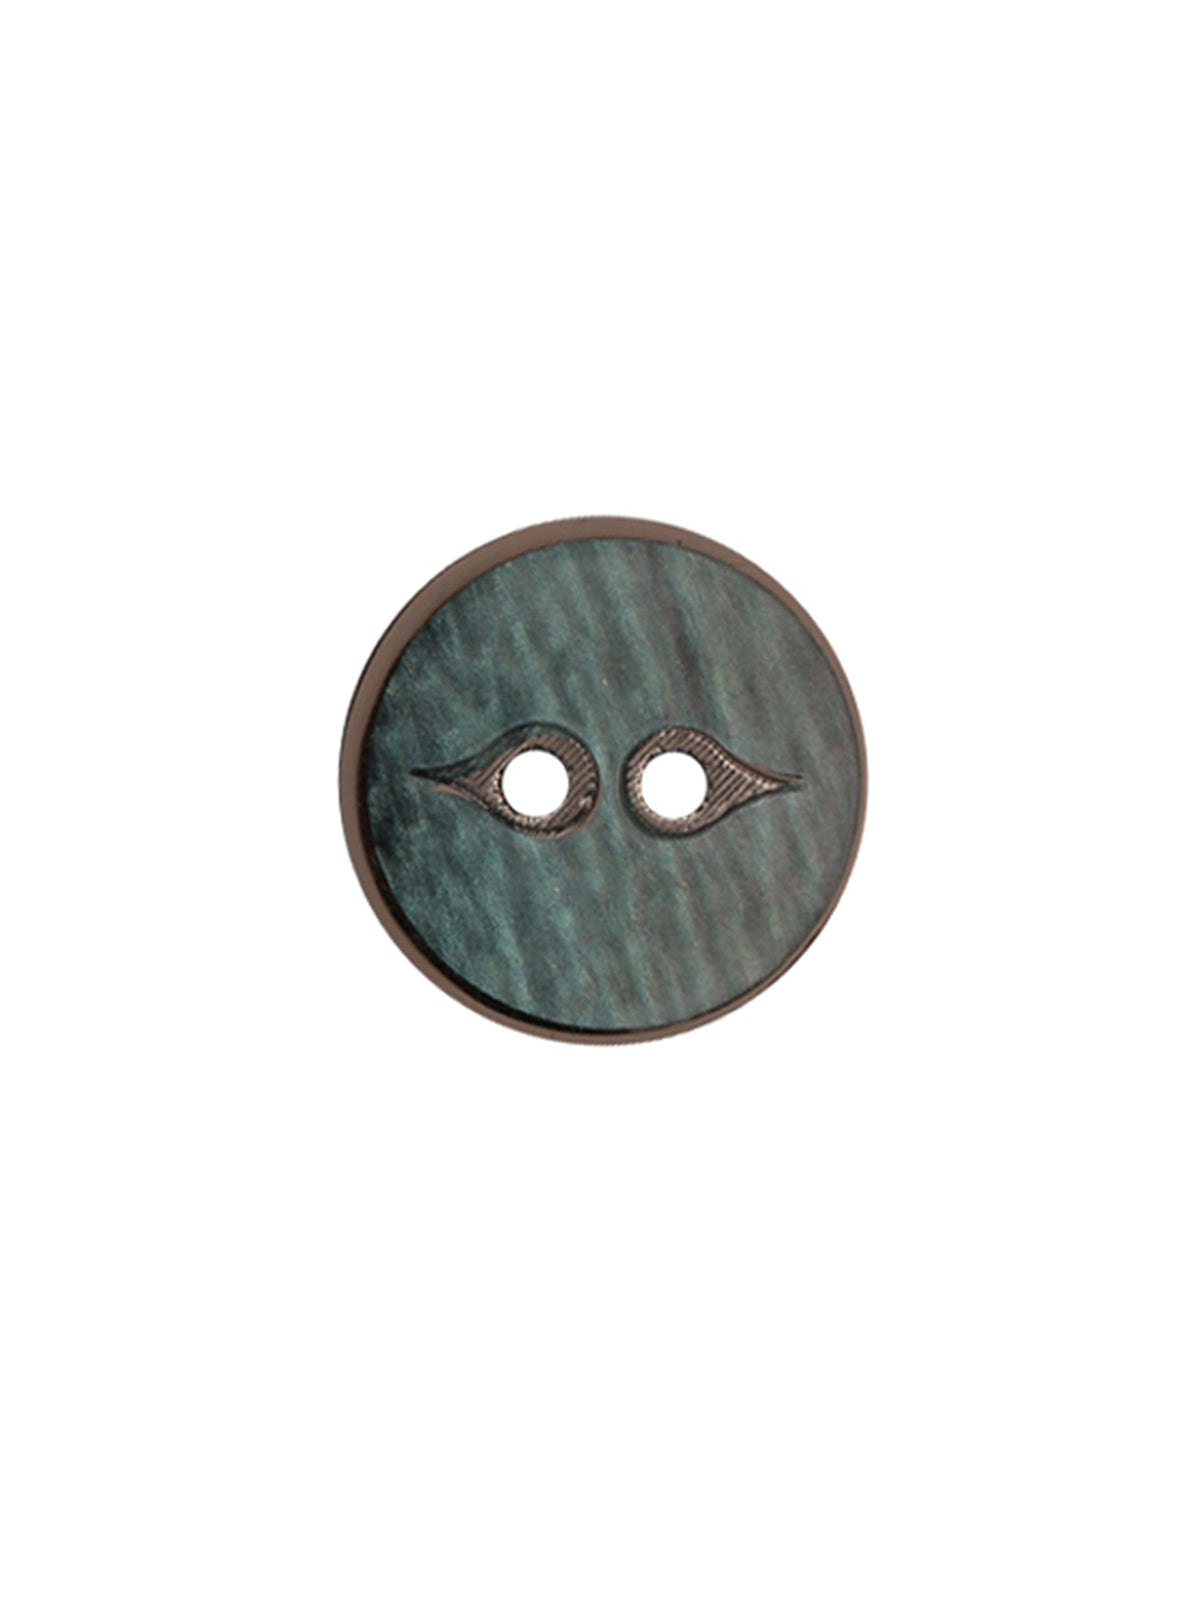 Fancy Round Shape 2-Hole Smooth & Shiny Decorative Sea Green Color Button